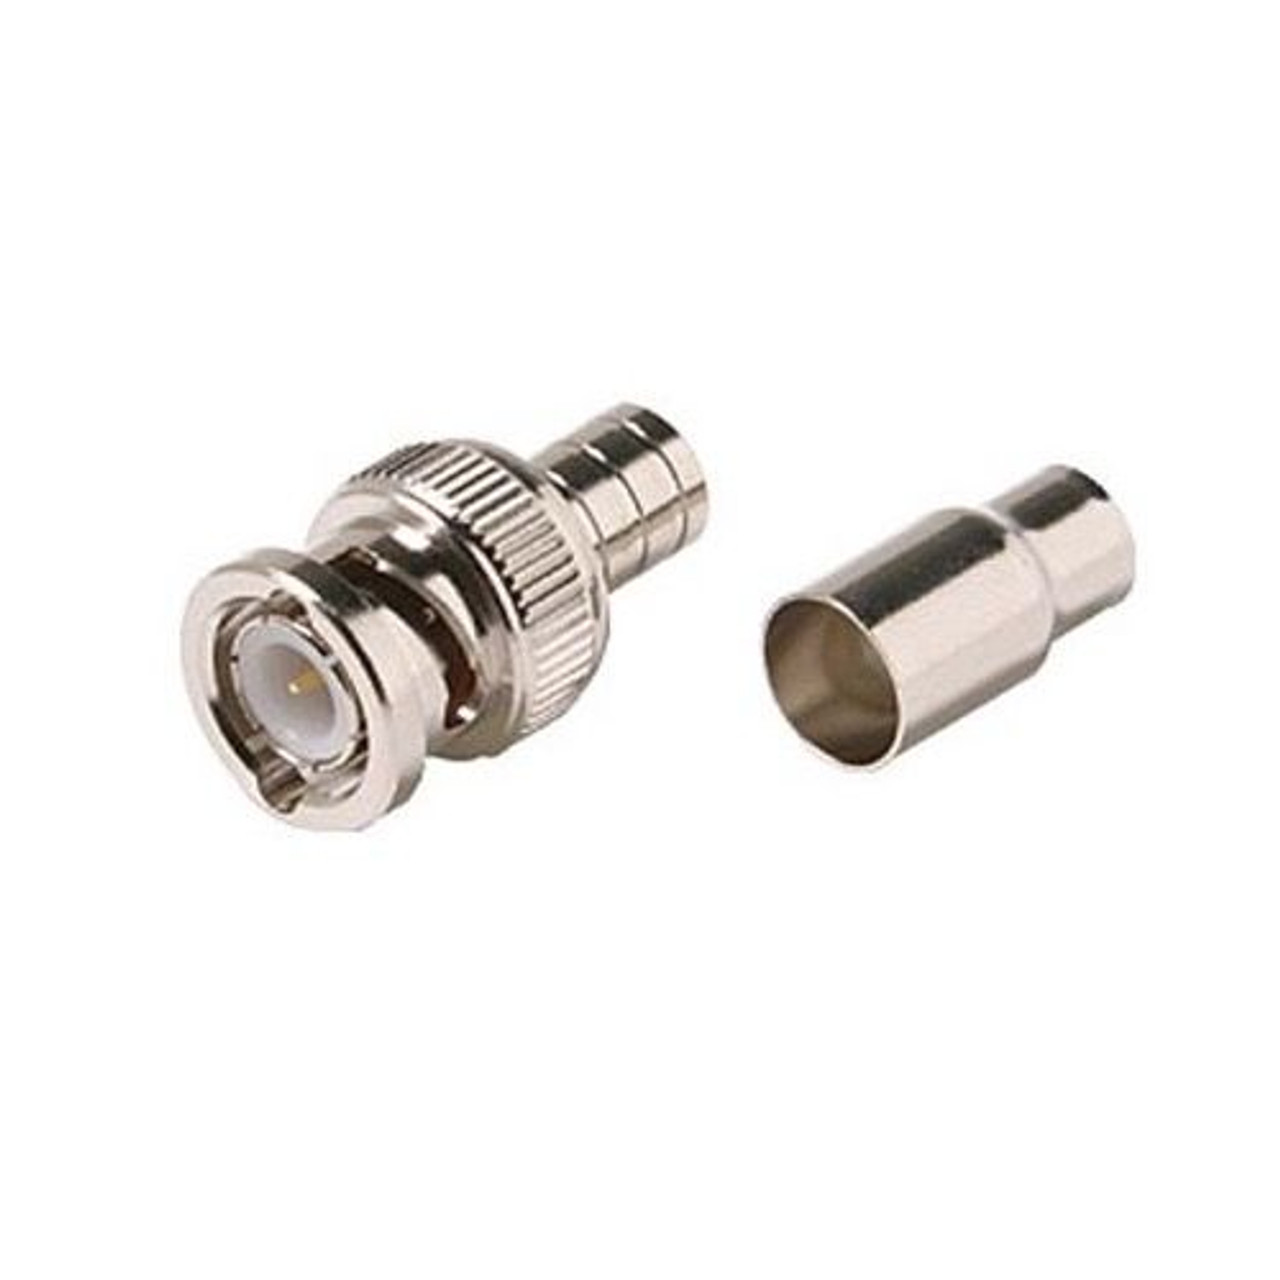 Summit BNC Connector Male RG6 Crimp On Coaxial 2 Piece Nickel Plate Brass 200-139 2-Piece Plug Commercial Grade Coaxial Male Plug Adapter Crimp-On BNC to RG6 Converter